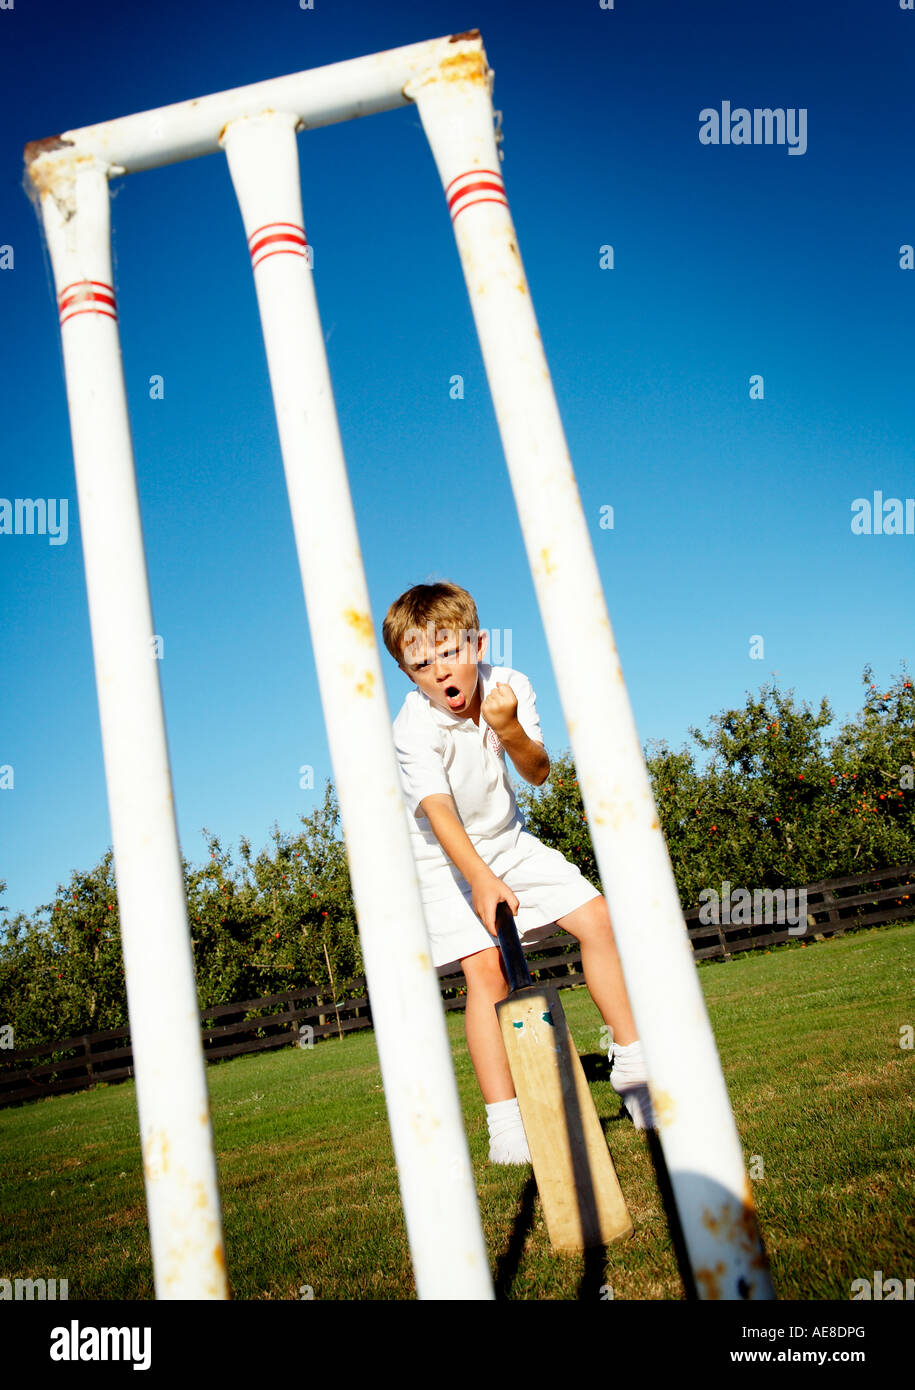 young boy in sports uniform playing cricket Stock Photo